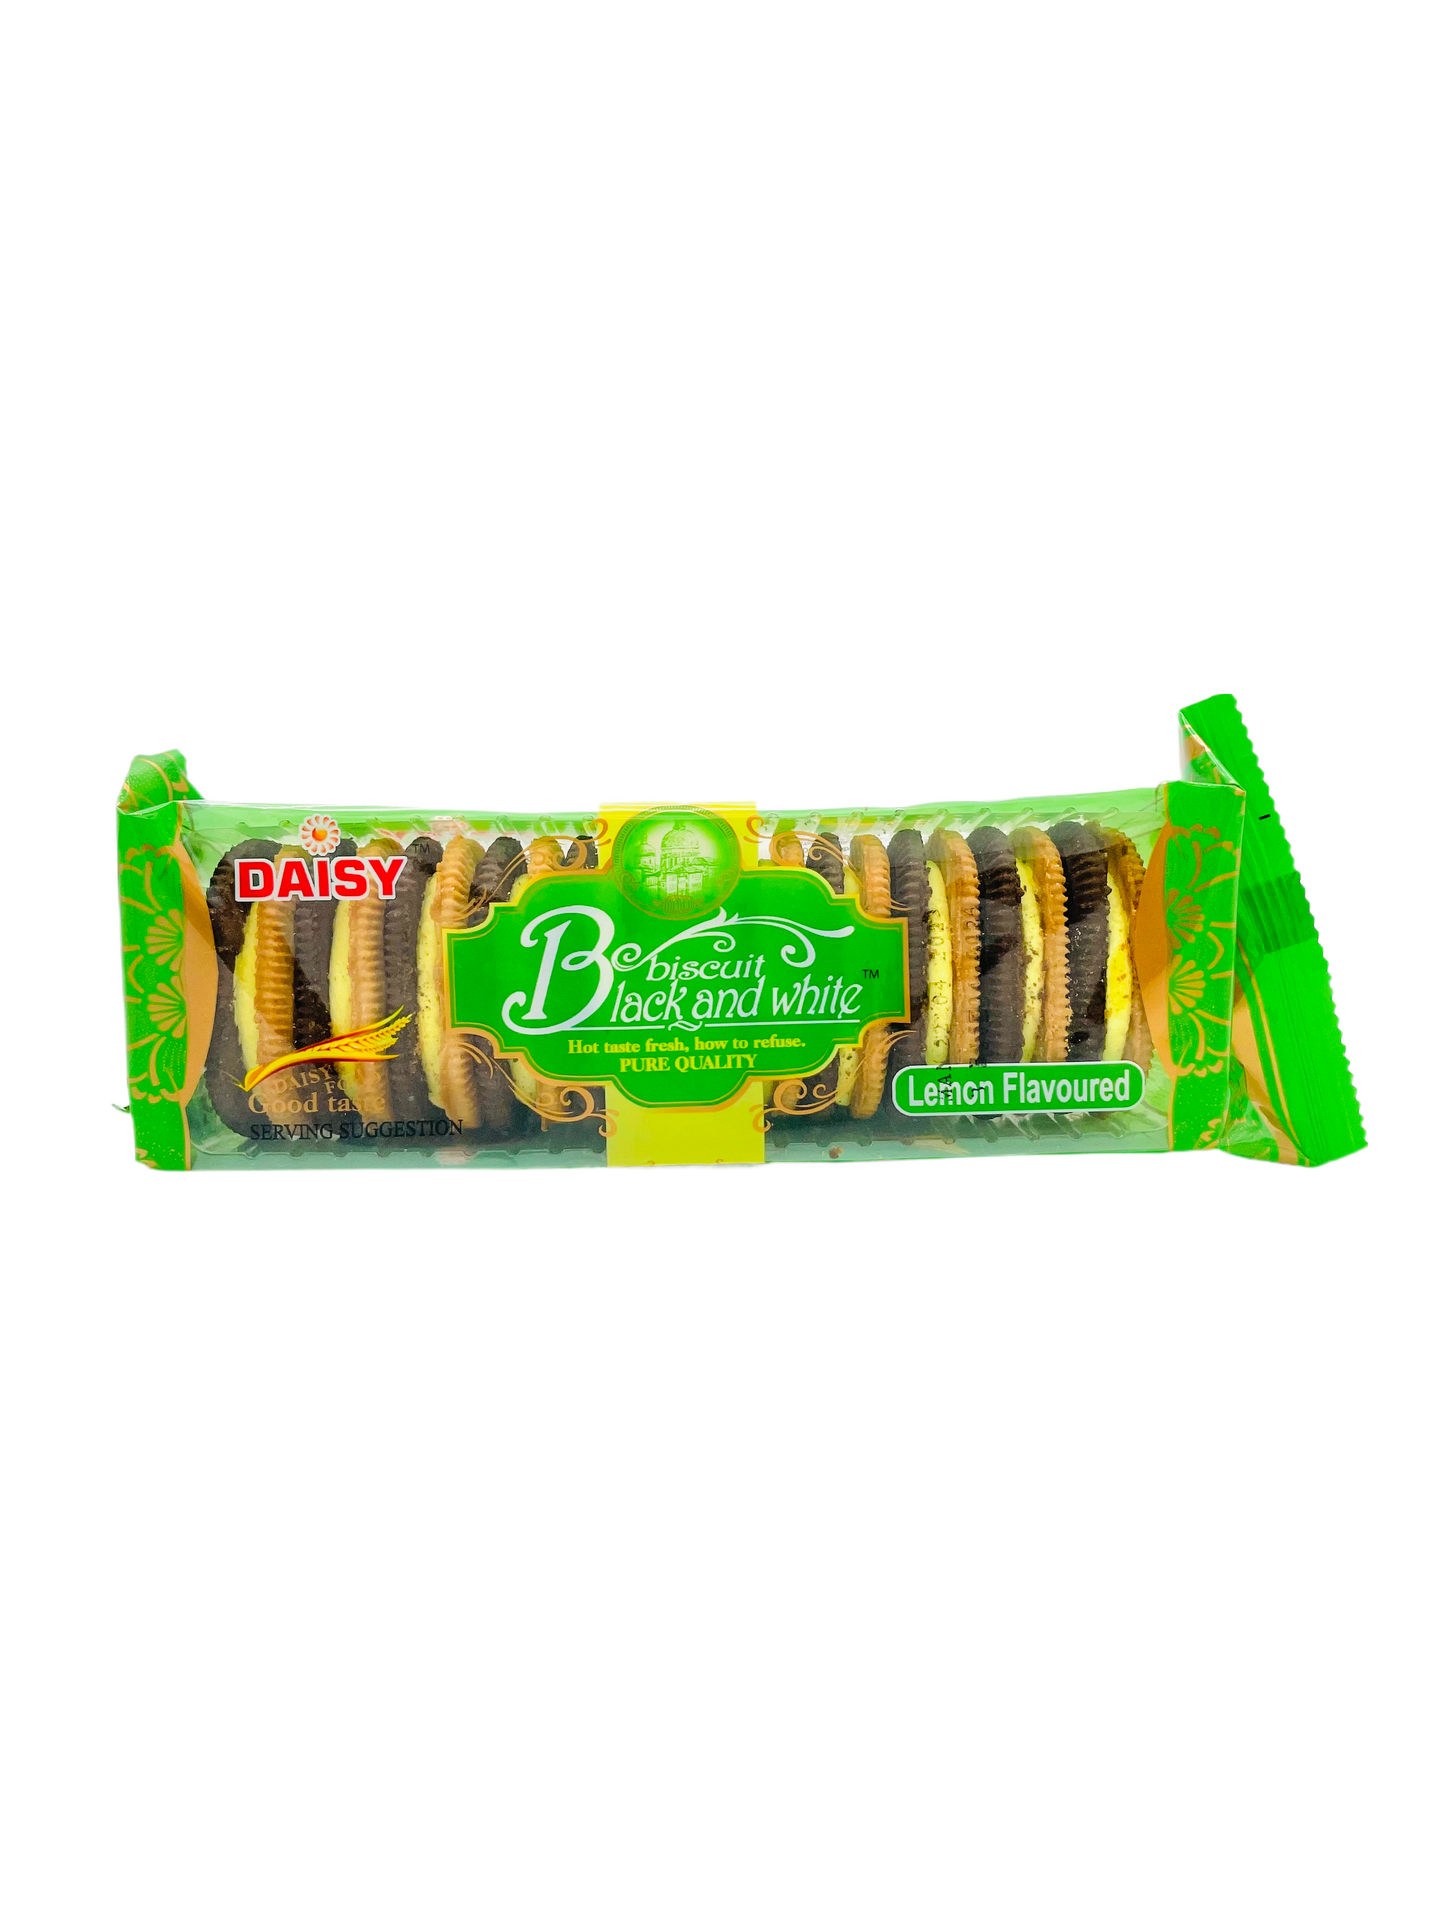 Daisy Biscuits Lemon Flavoured 130g